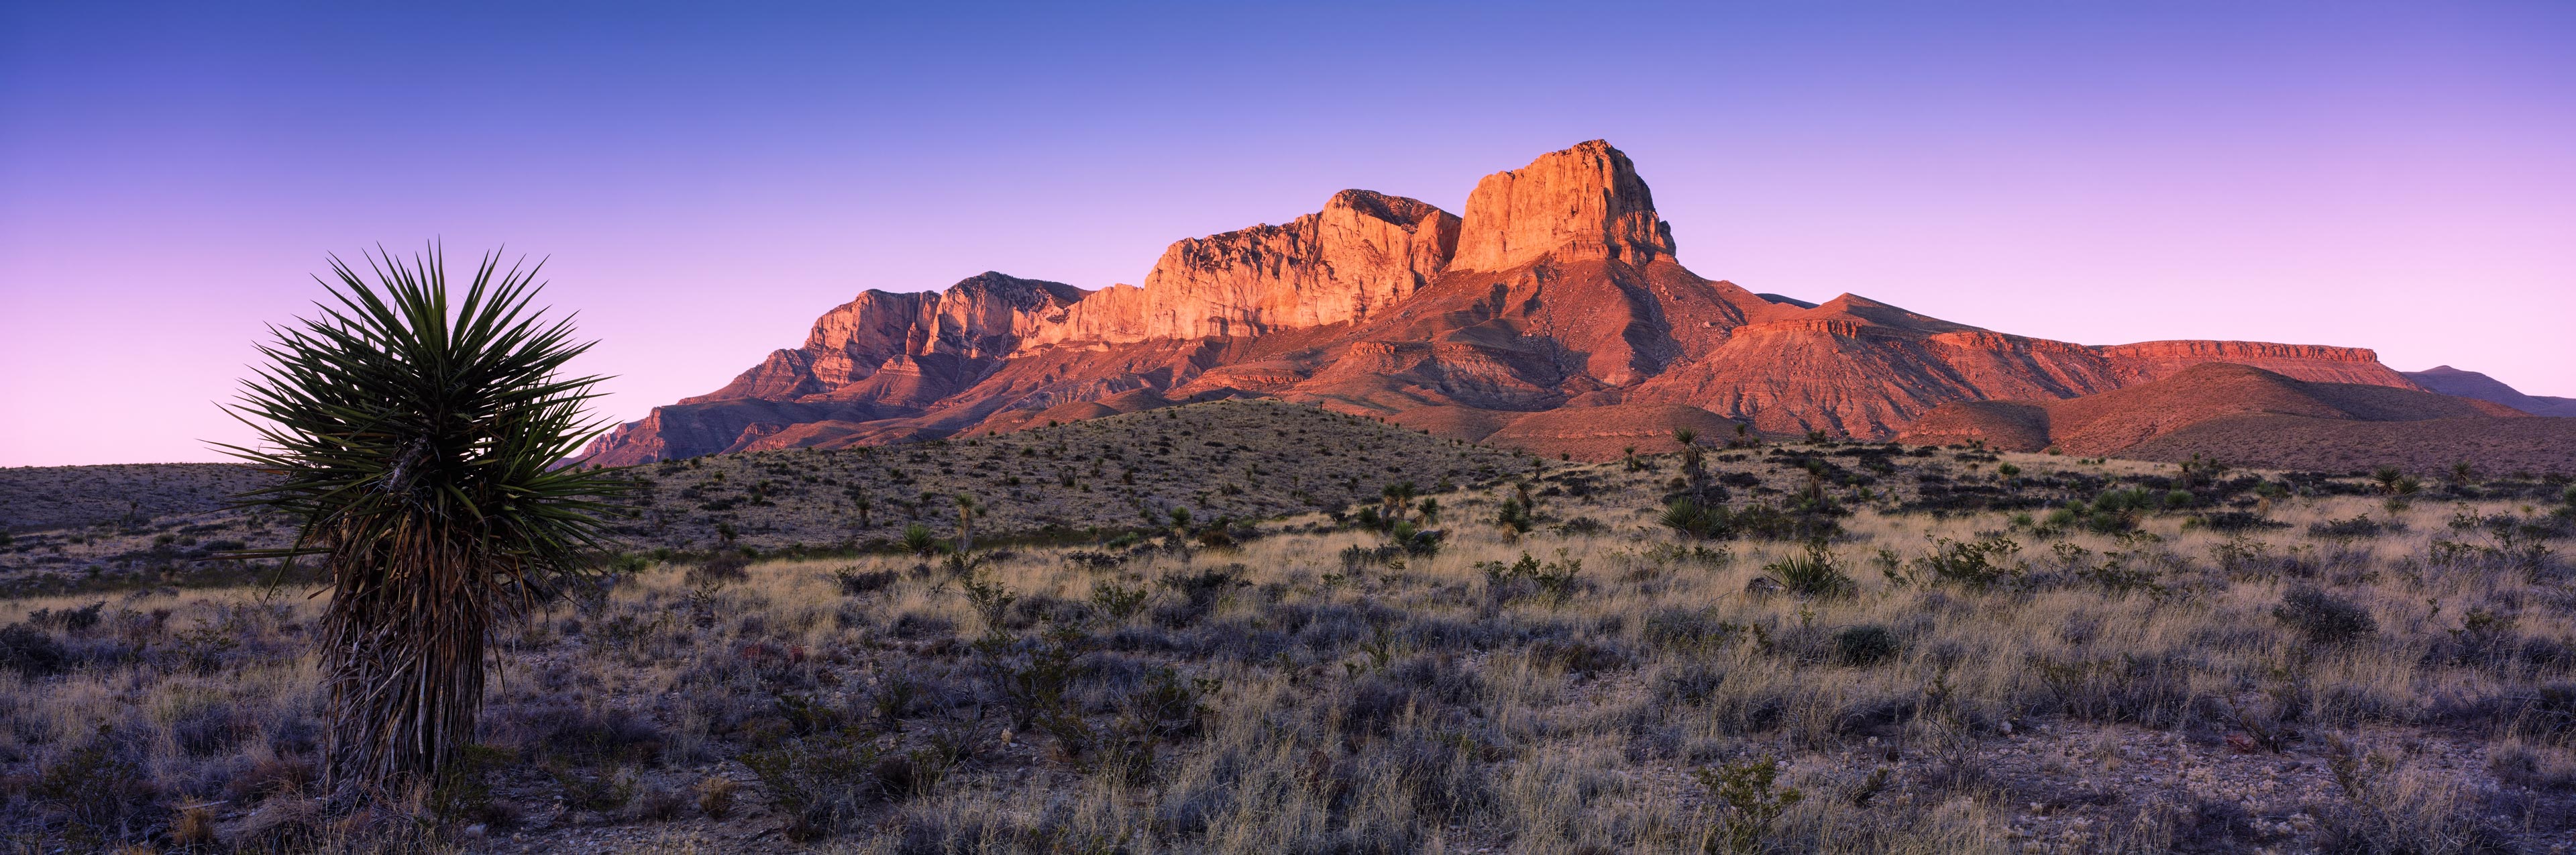 El Capitan, Guadalupe Mountains National Park, Texas, USA (34609.sisk5)